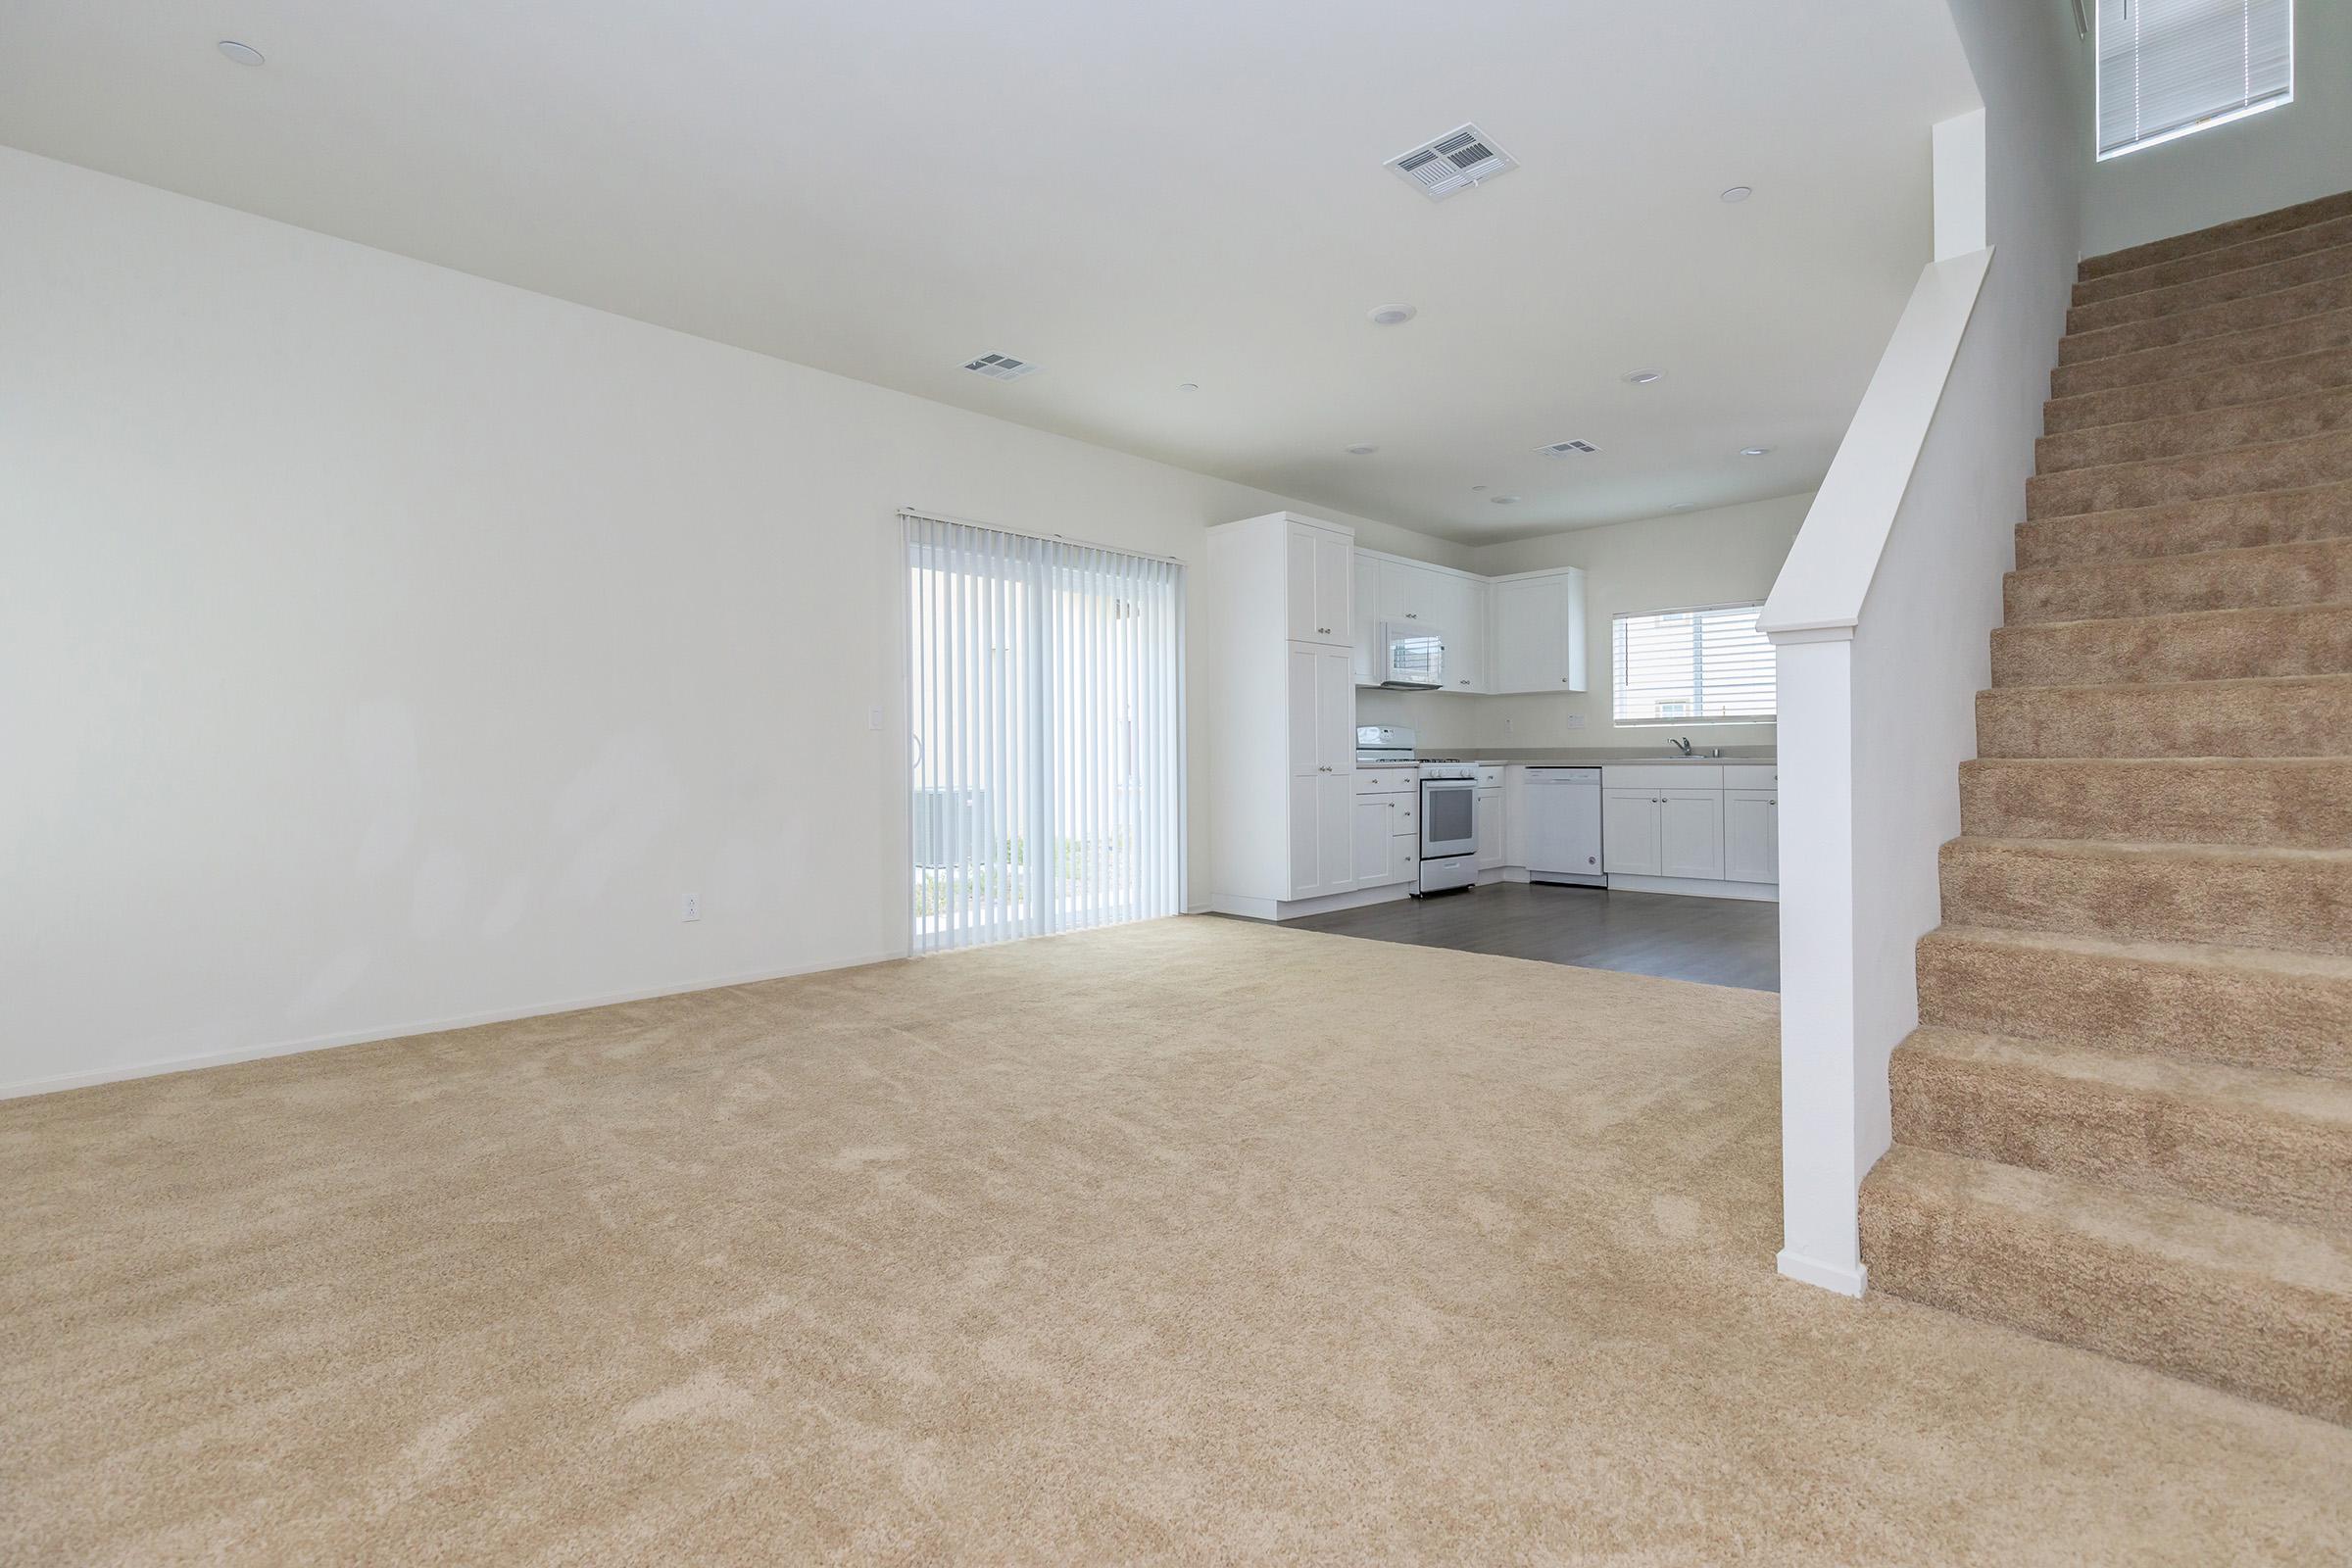 Stairs and living room with carpet